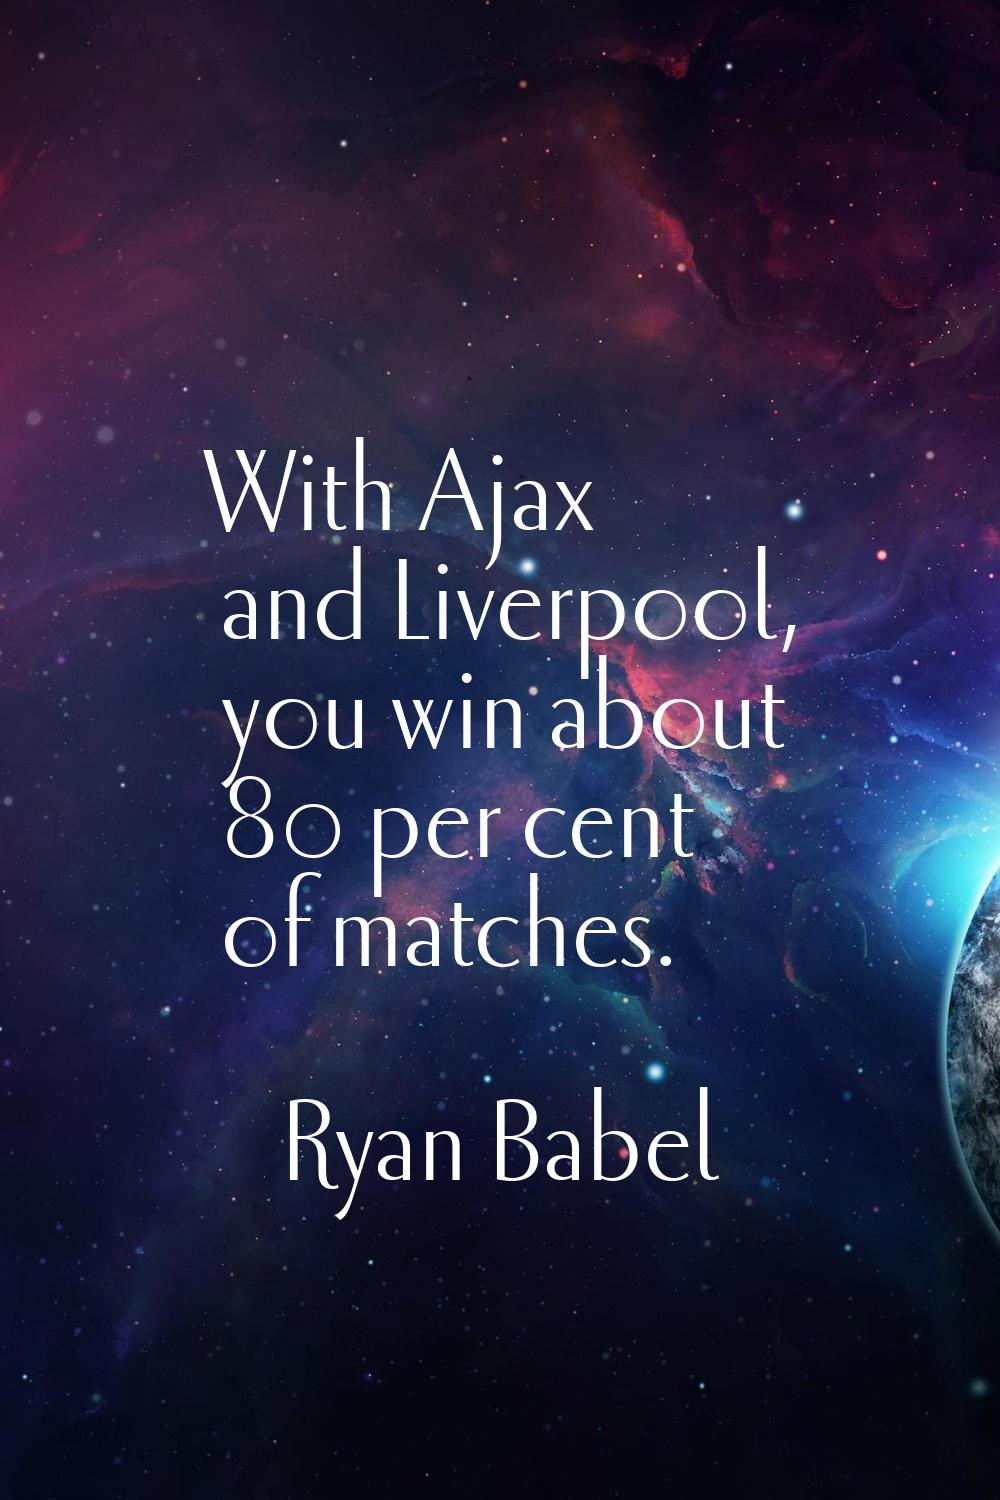 With Ajax and Liverpool, you win about 80 per cent of matches.